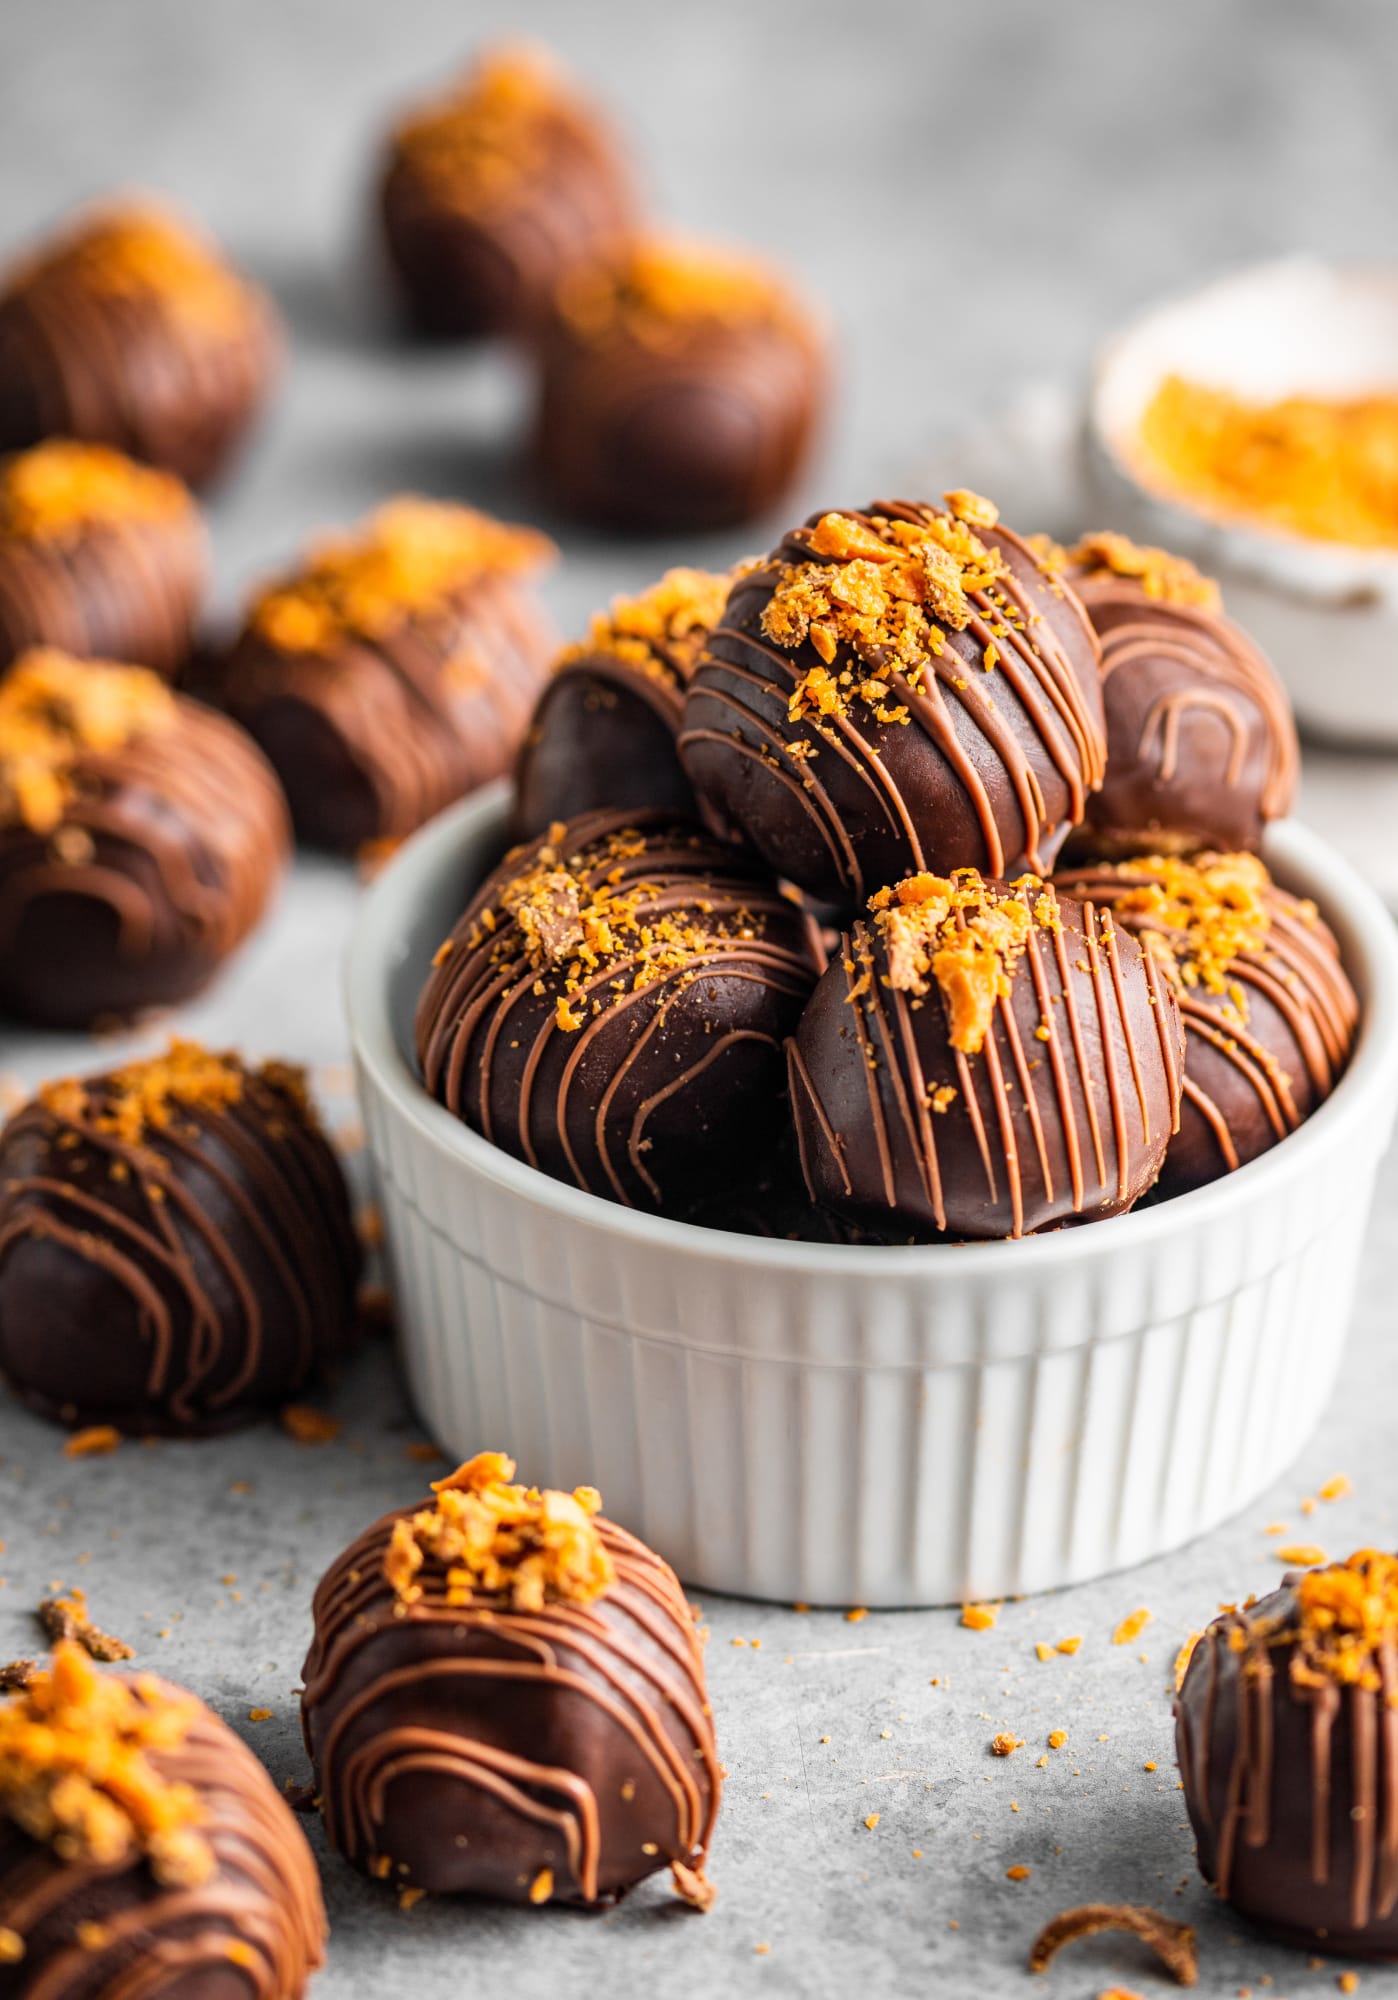 Butterfinger Cookie Dough Bites recipe is the ultimate dessert mash-up